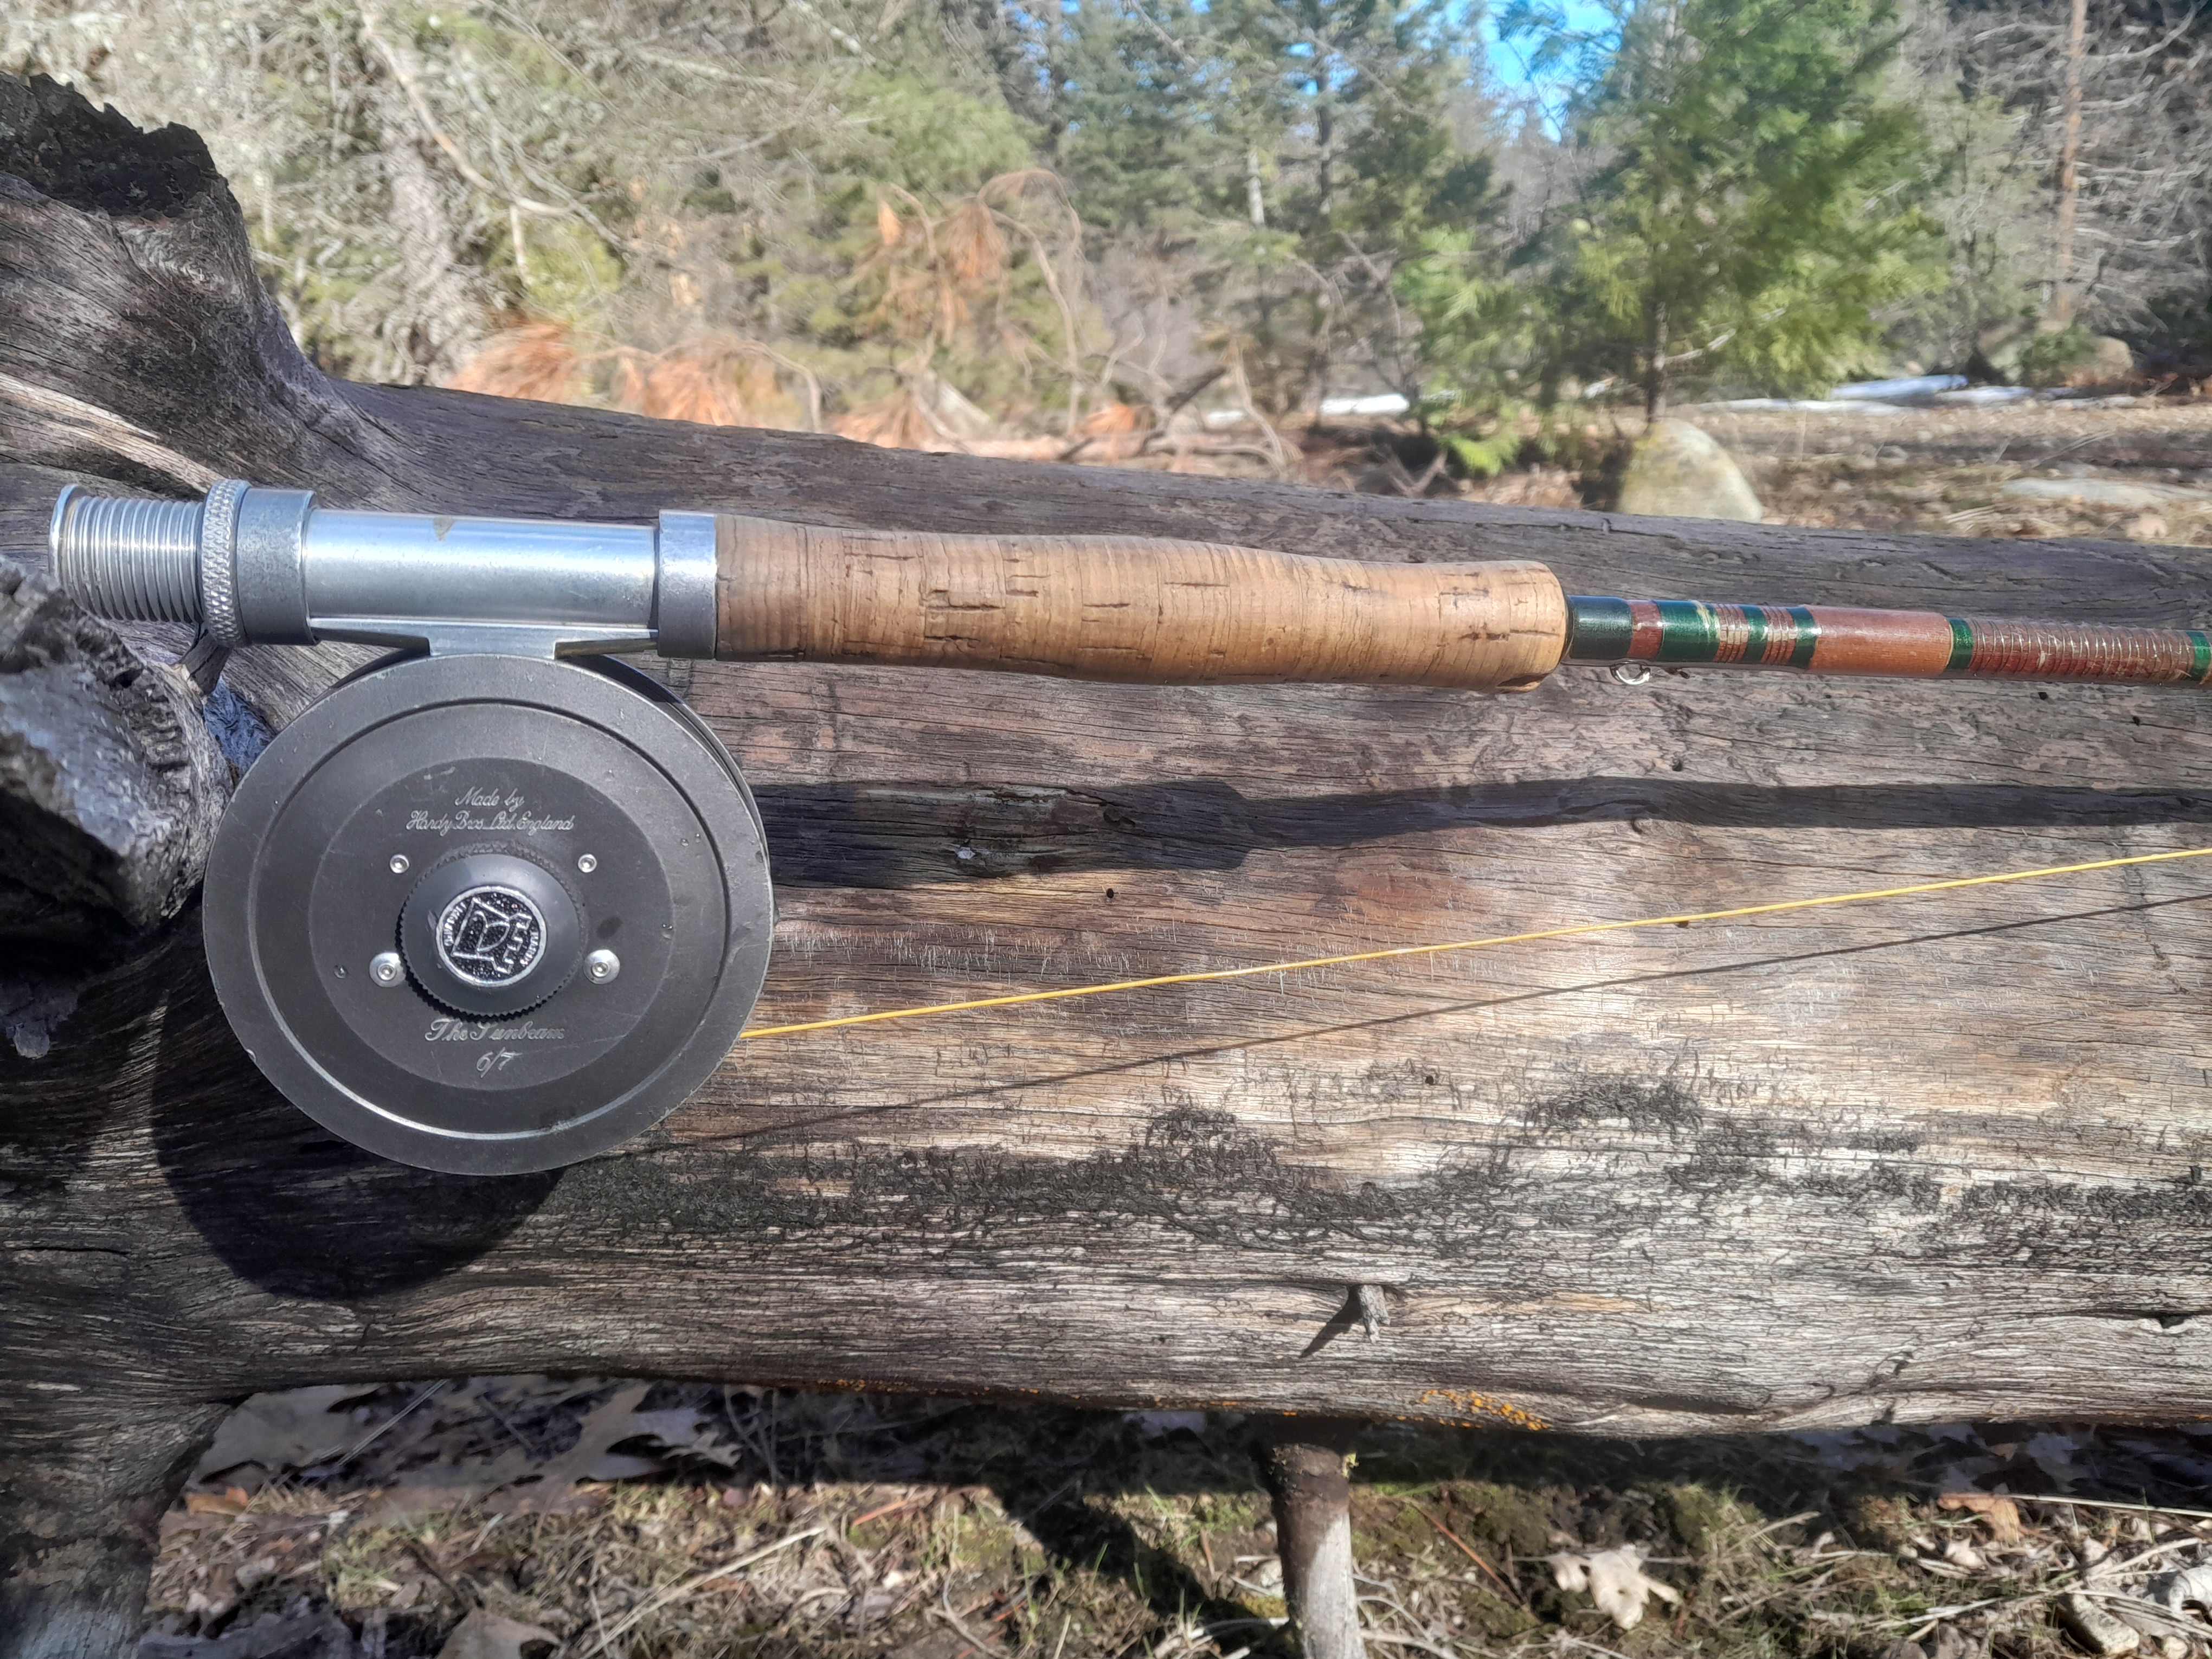 Walton Rods - For all the waters we fish